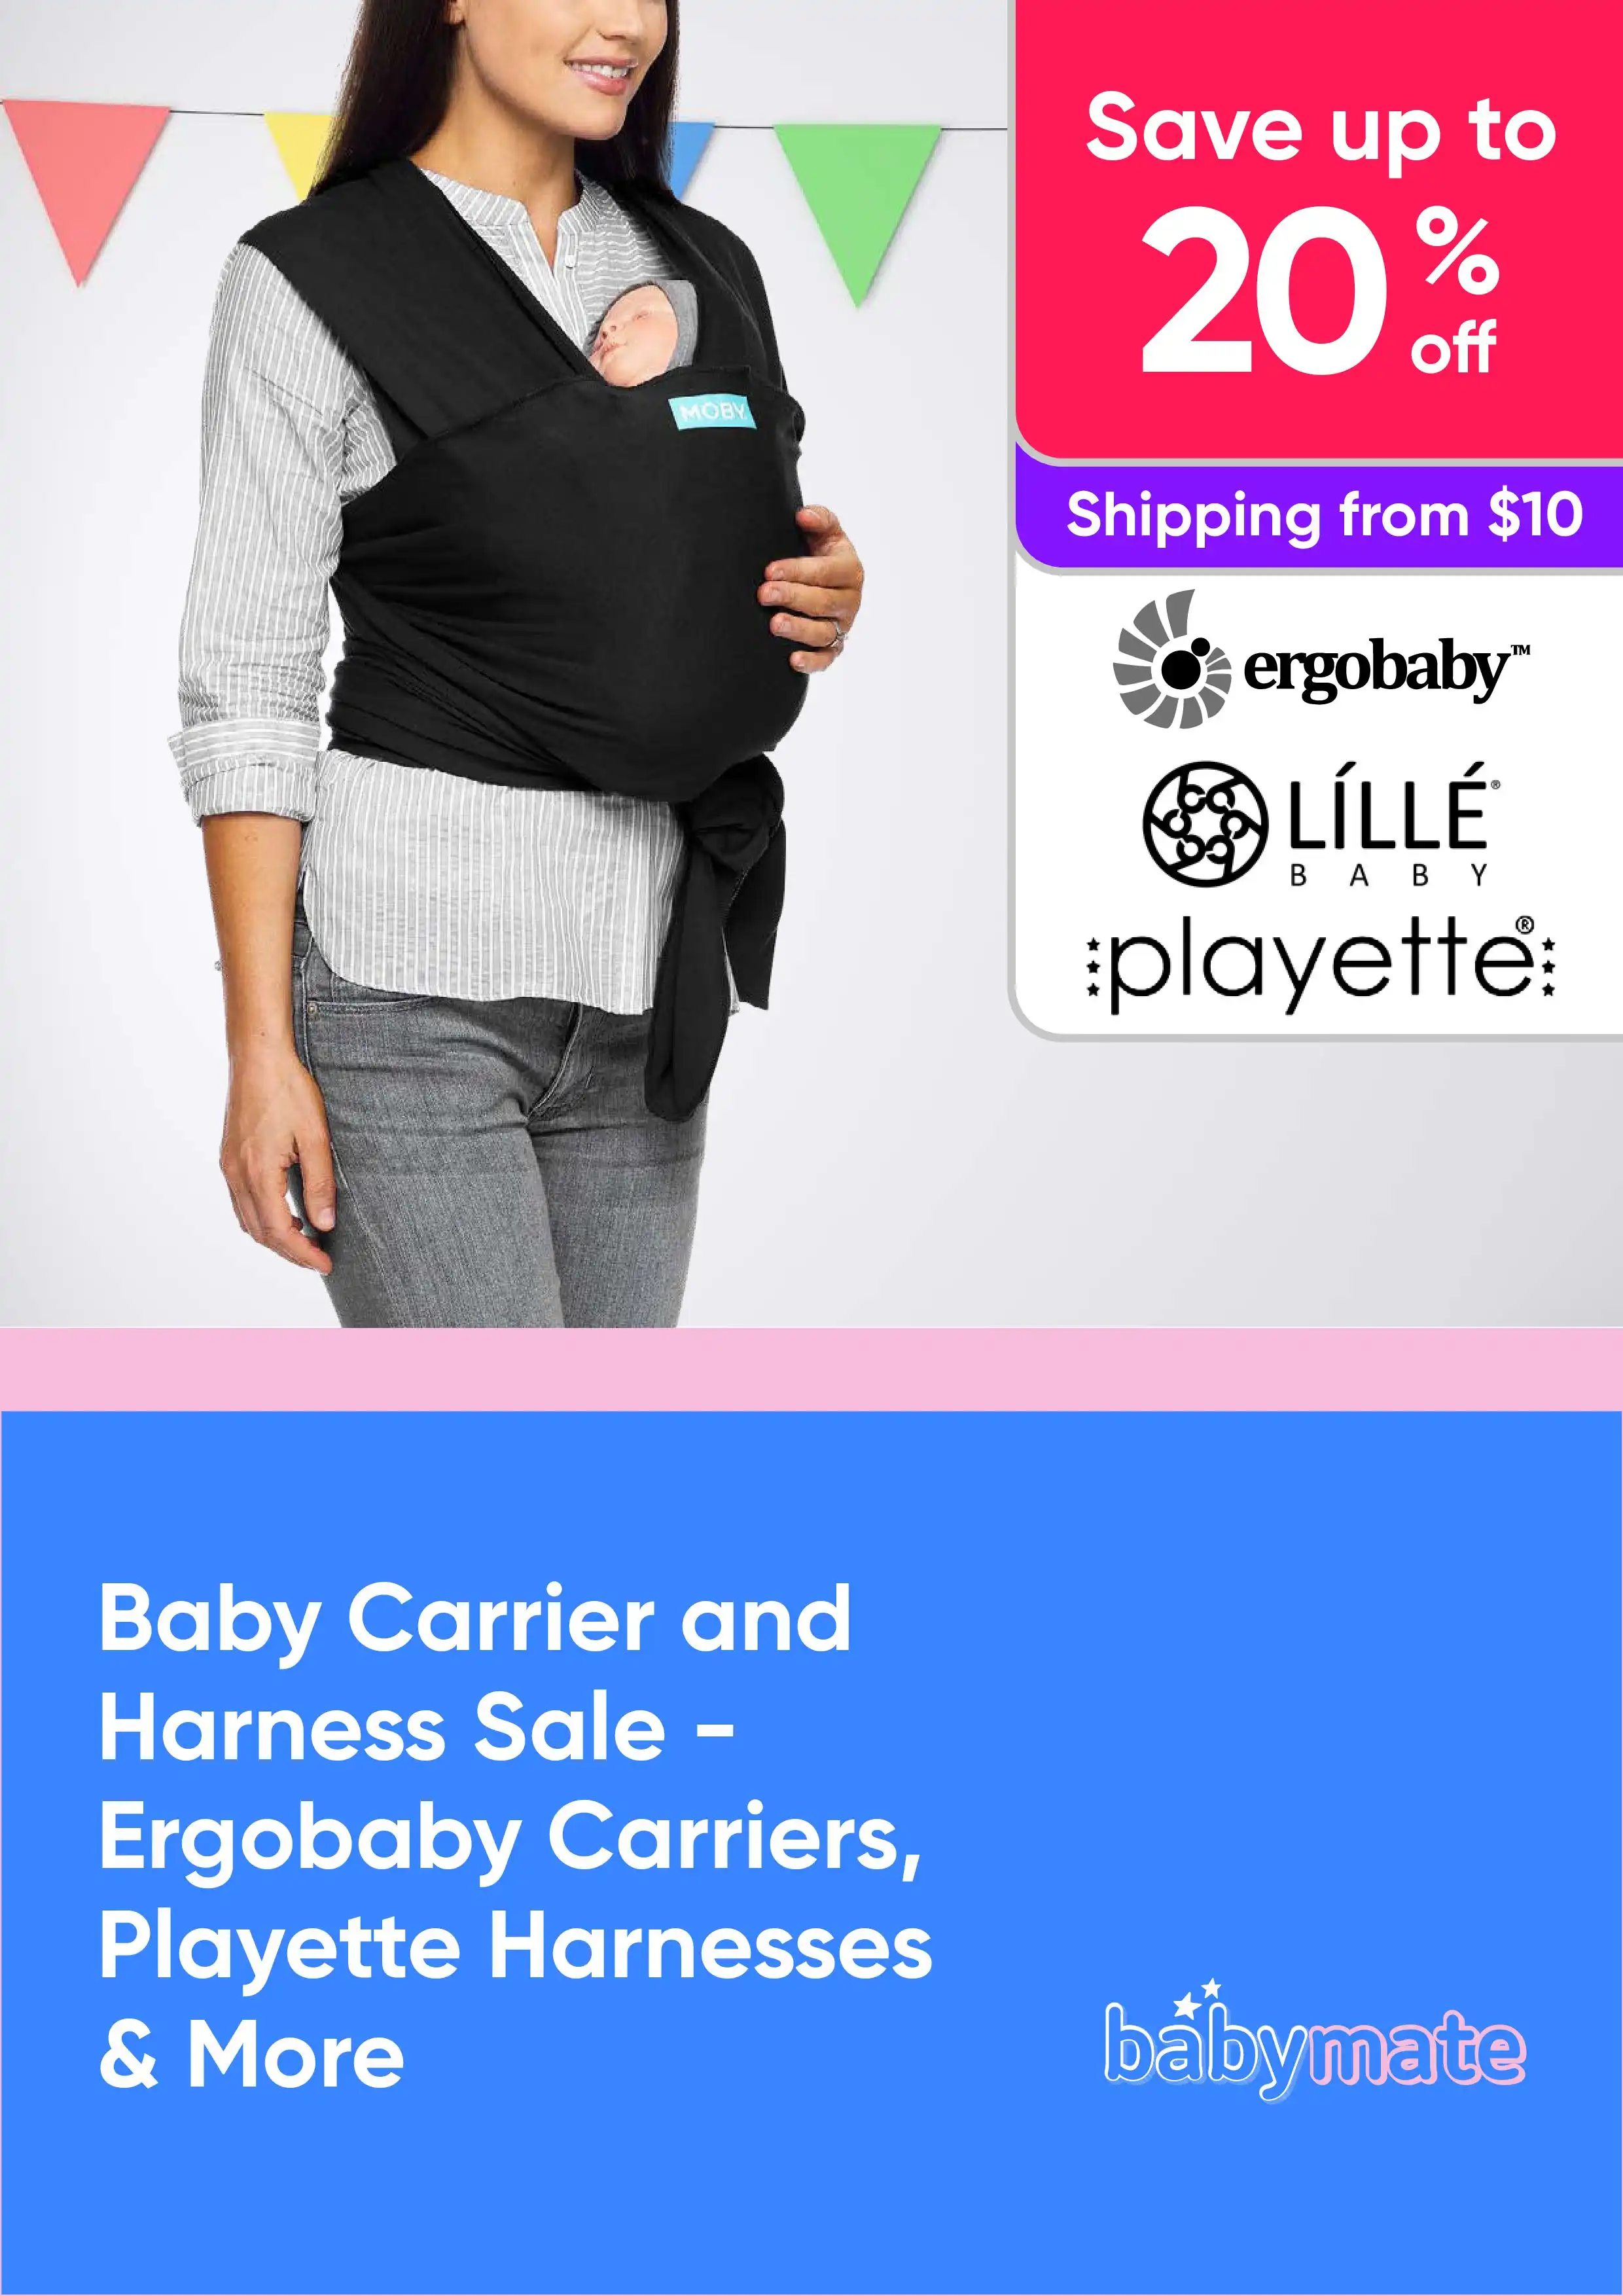 Baby Carriers and Harness on Sale - Shop Ergobaby Carriers, Playette Harnesses